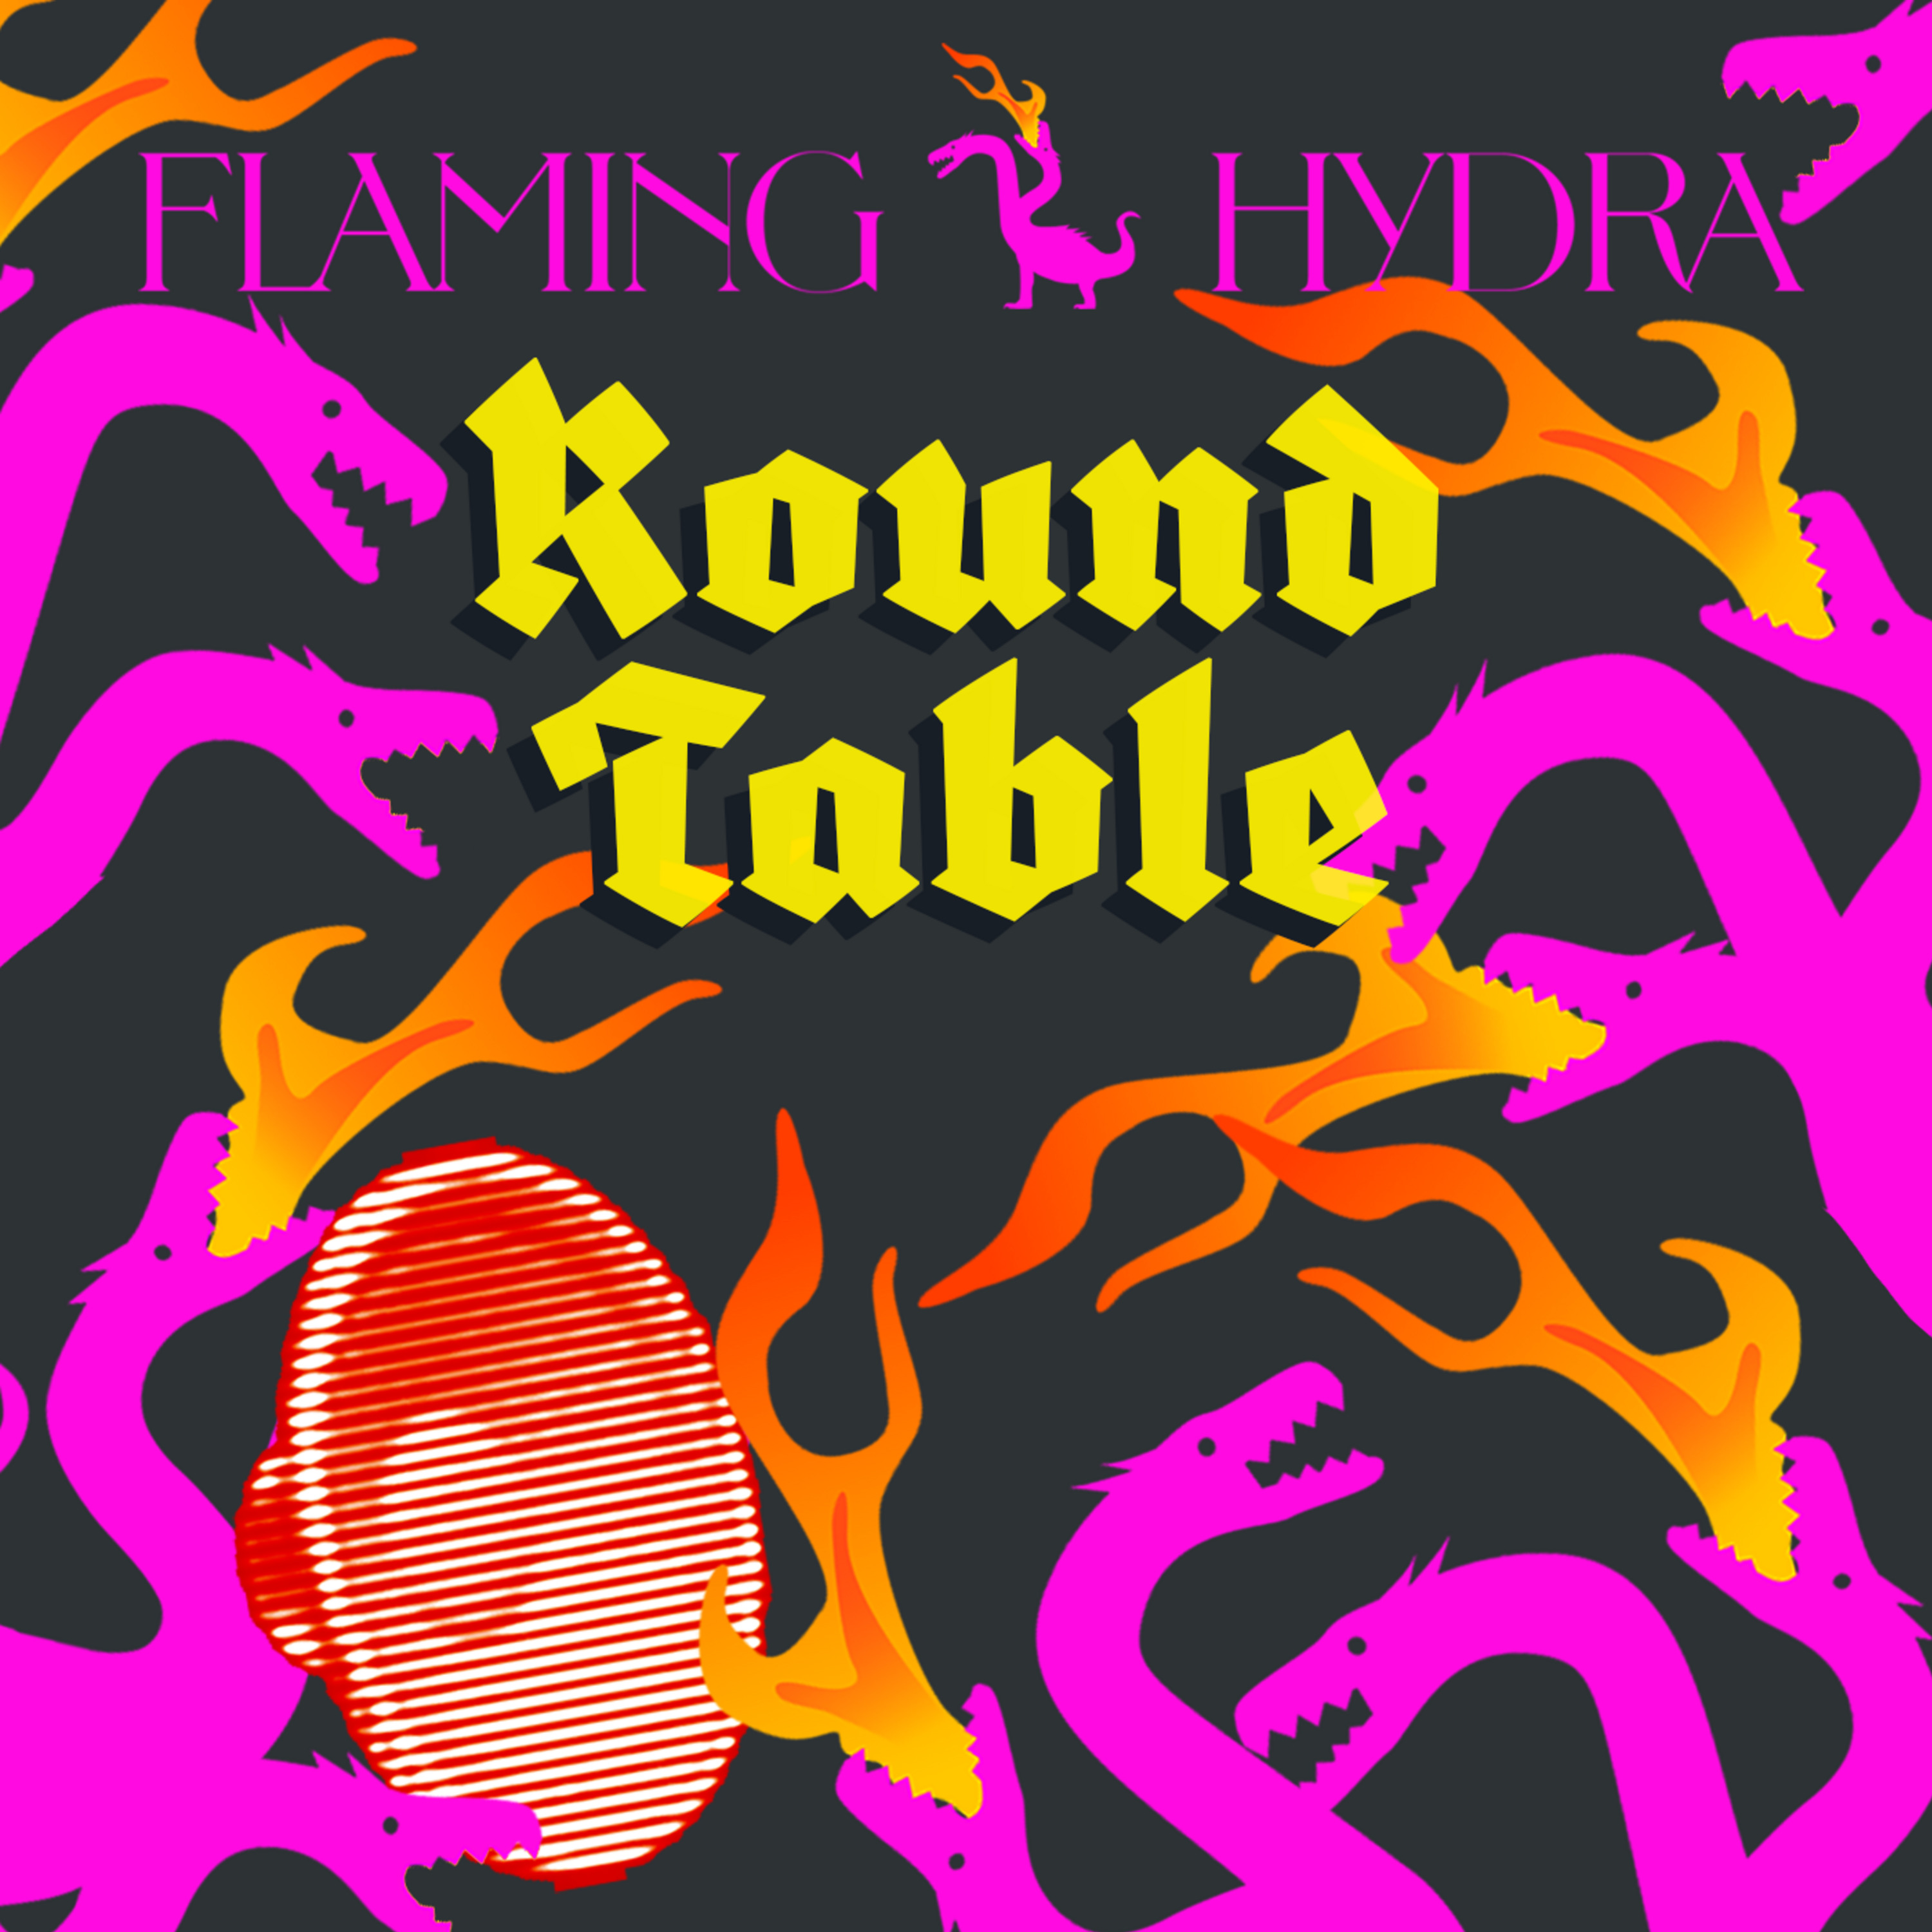 Flaming Hydra Round Table! Promotional Announcement!